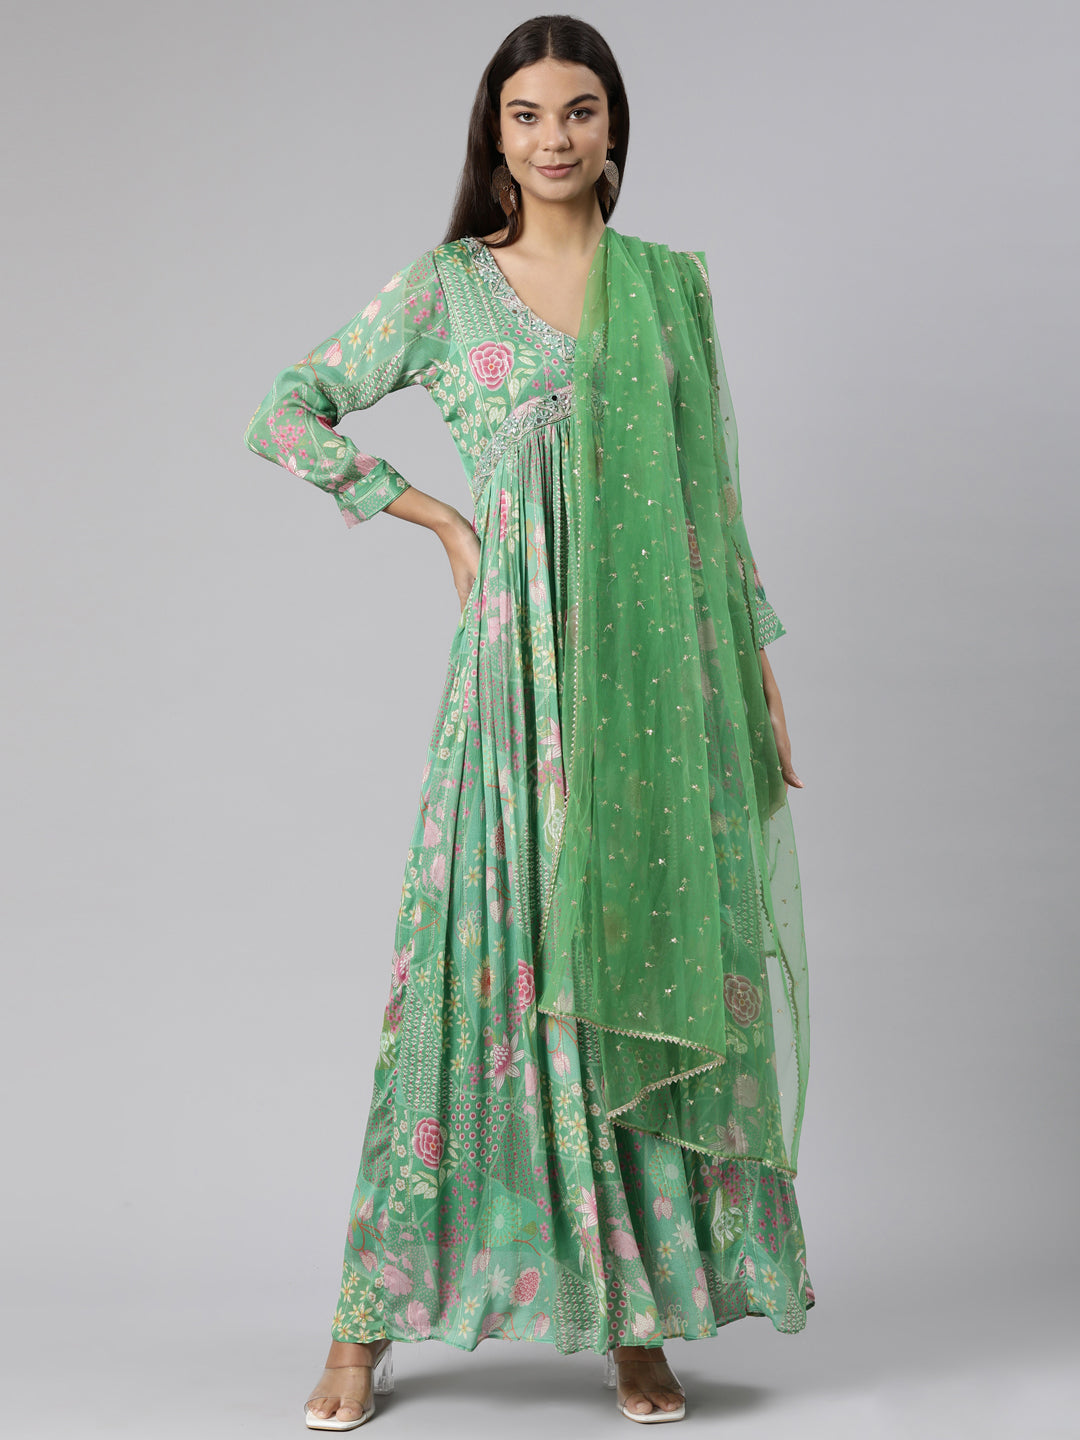 Neeru's Green Flared Casual Floral Dresses